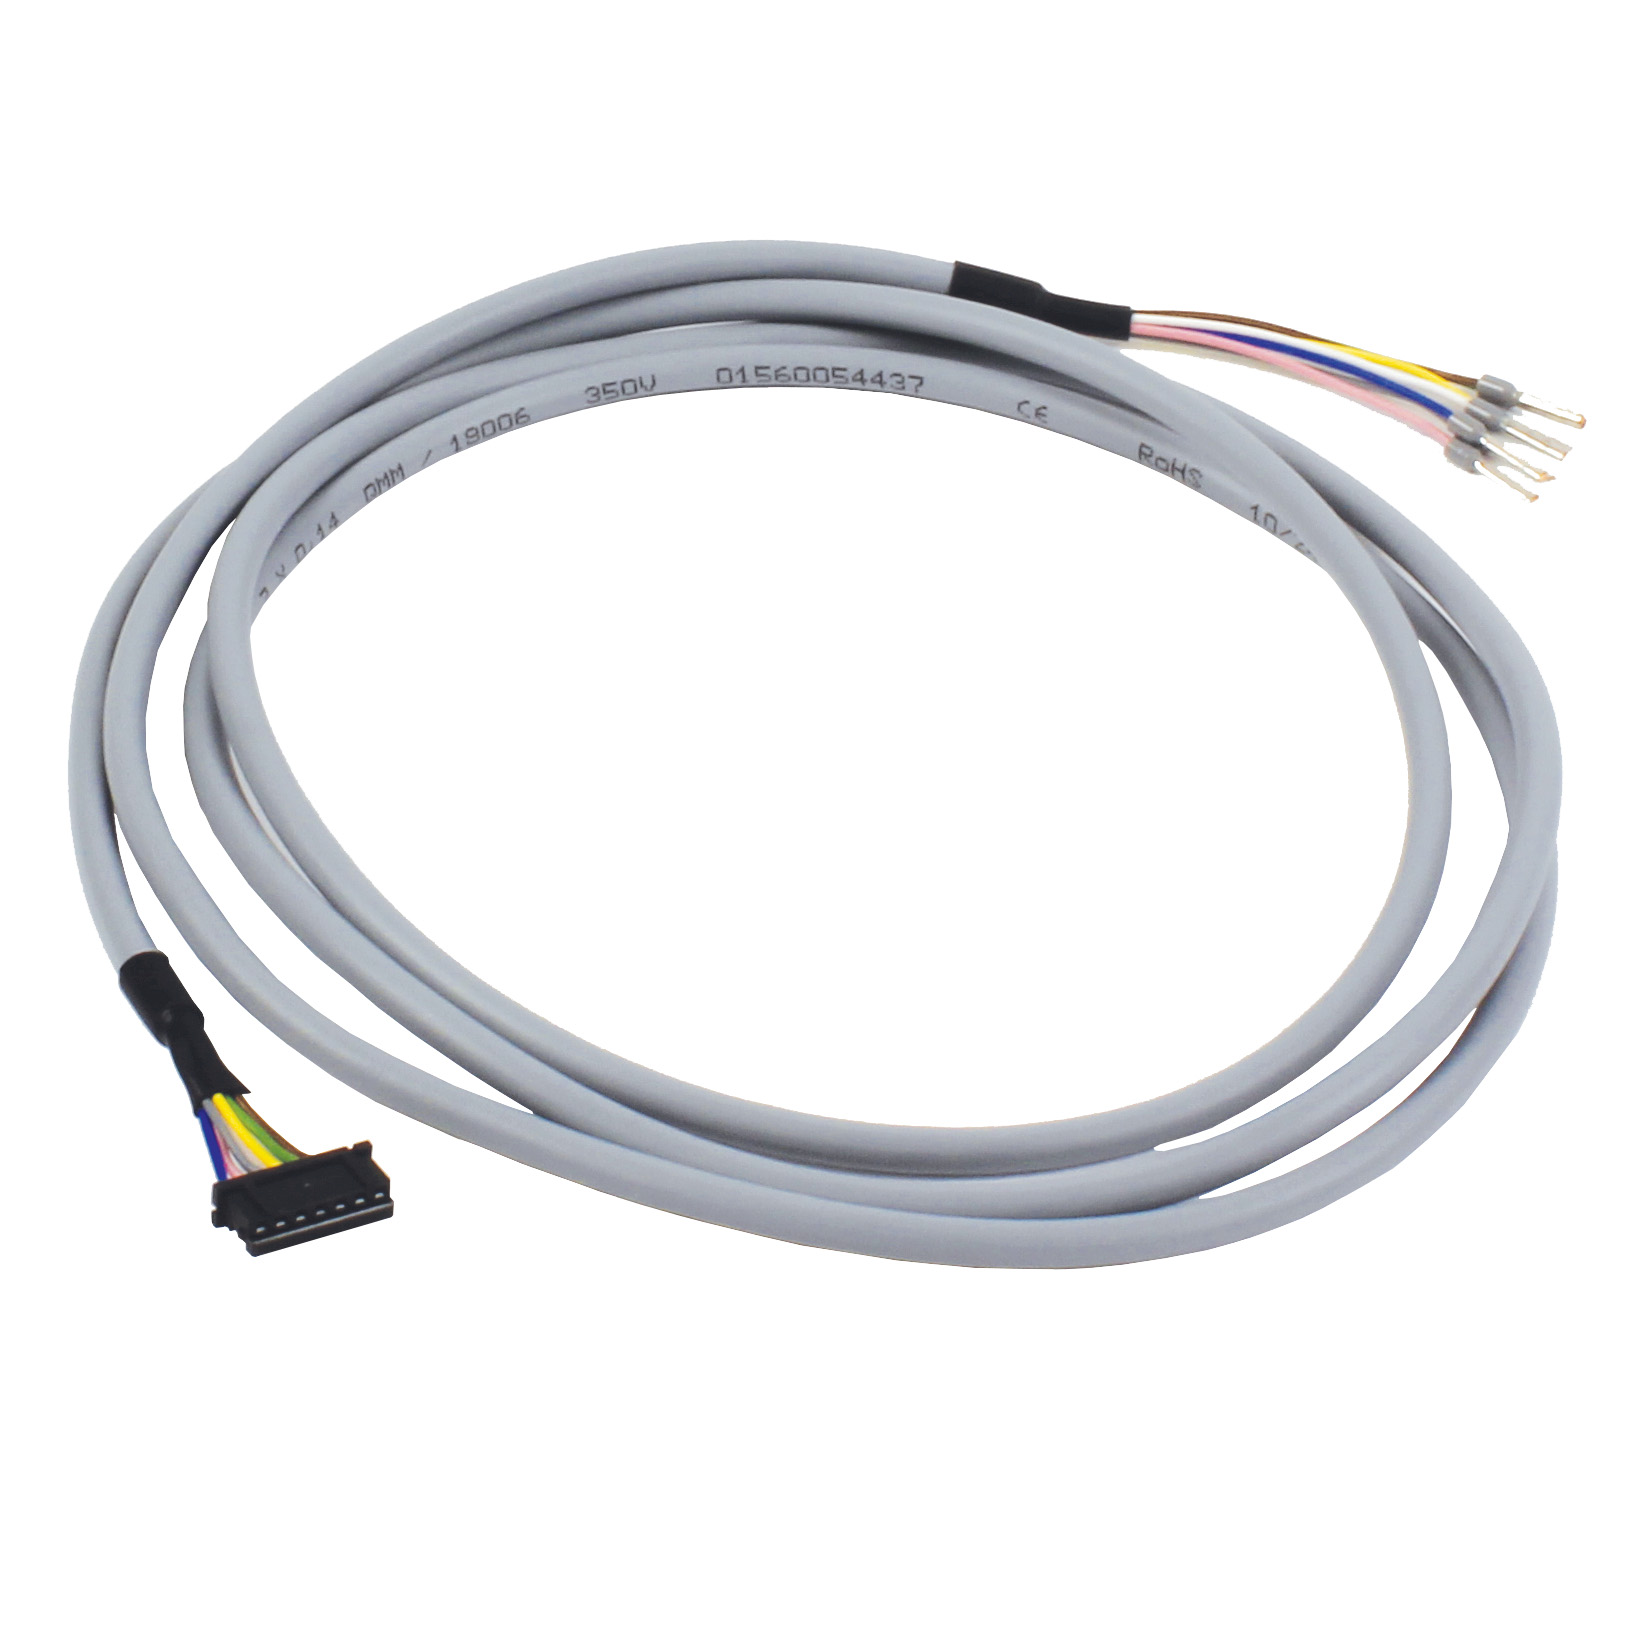 Speed controller 5A accessories - Kit of 4 cables for DC motor -  - 